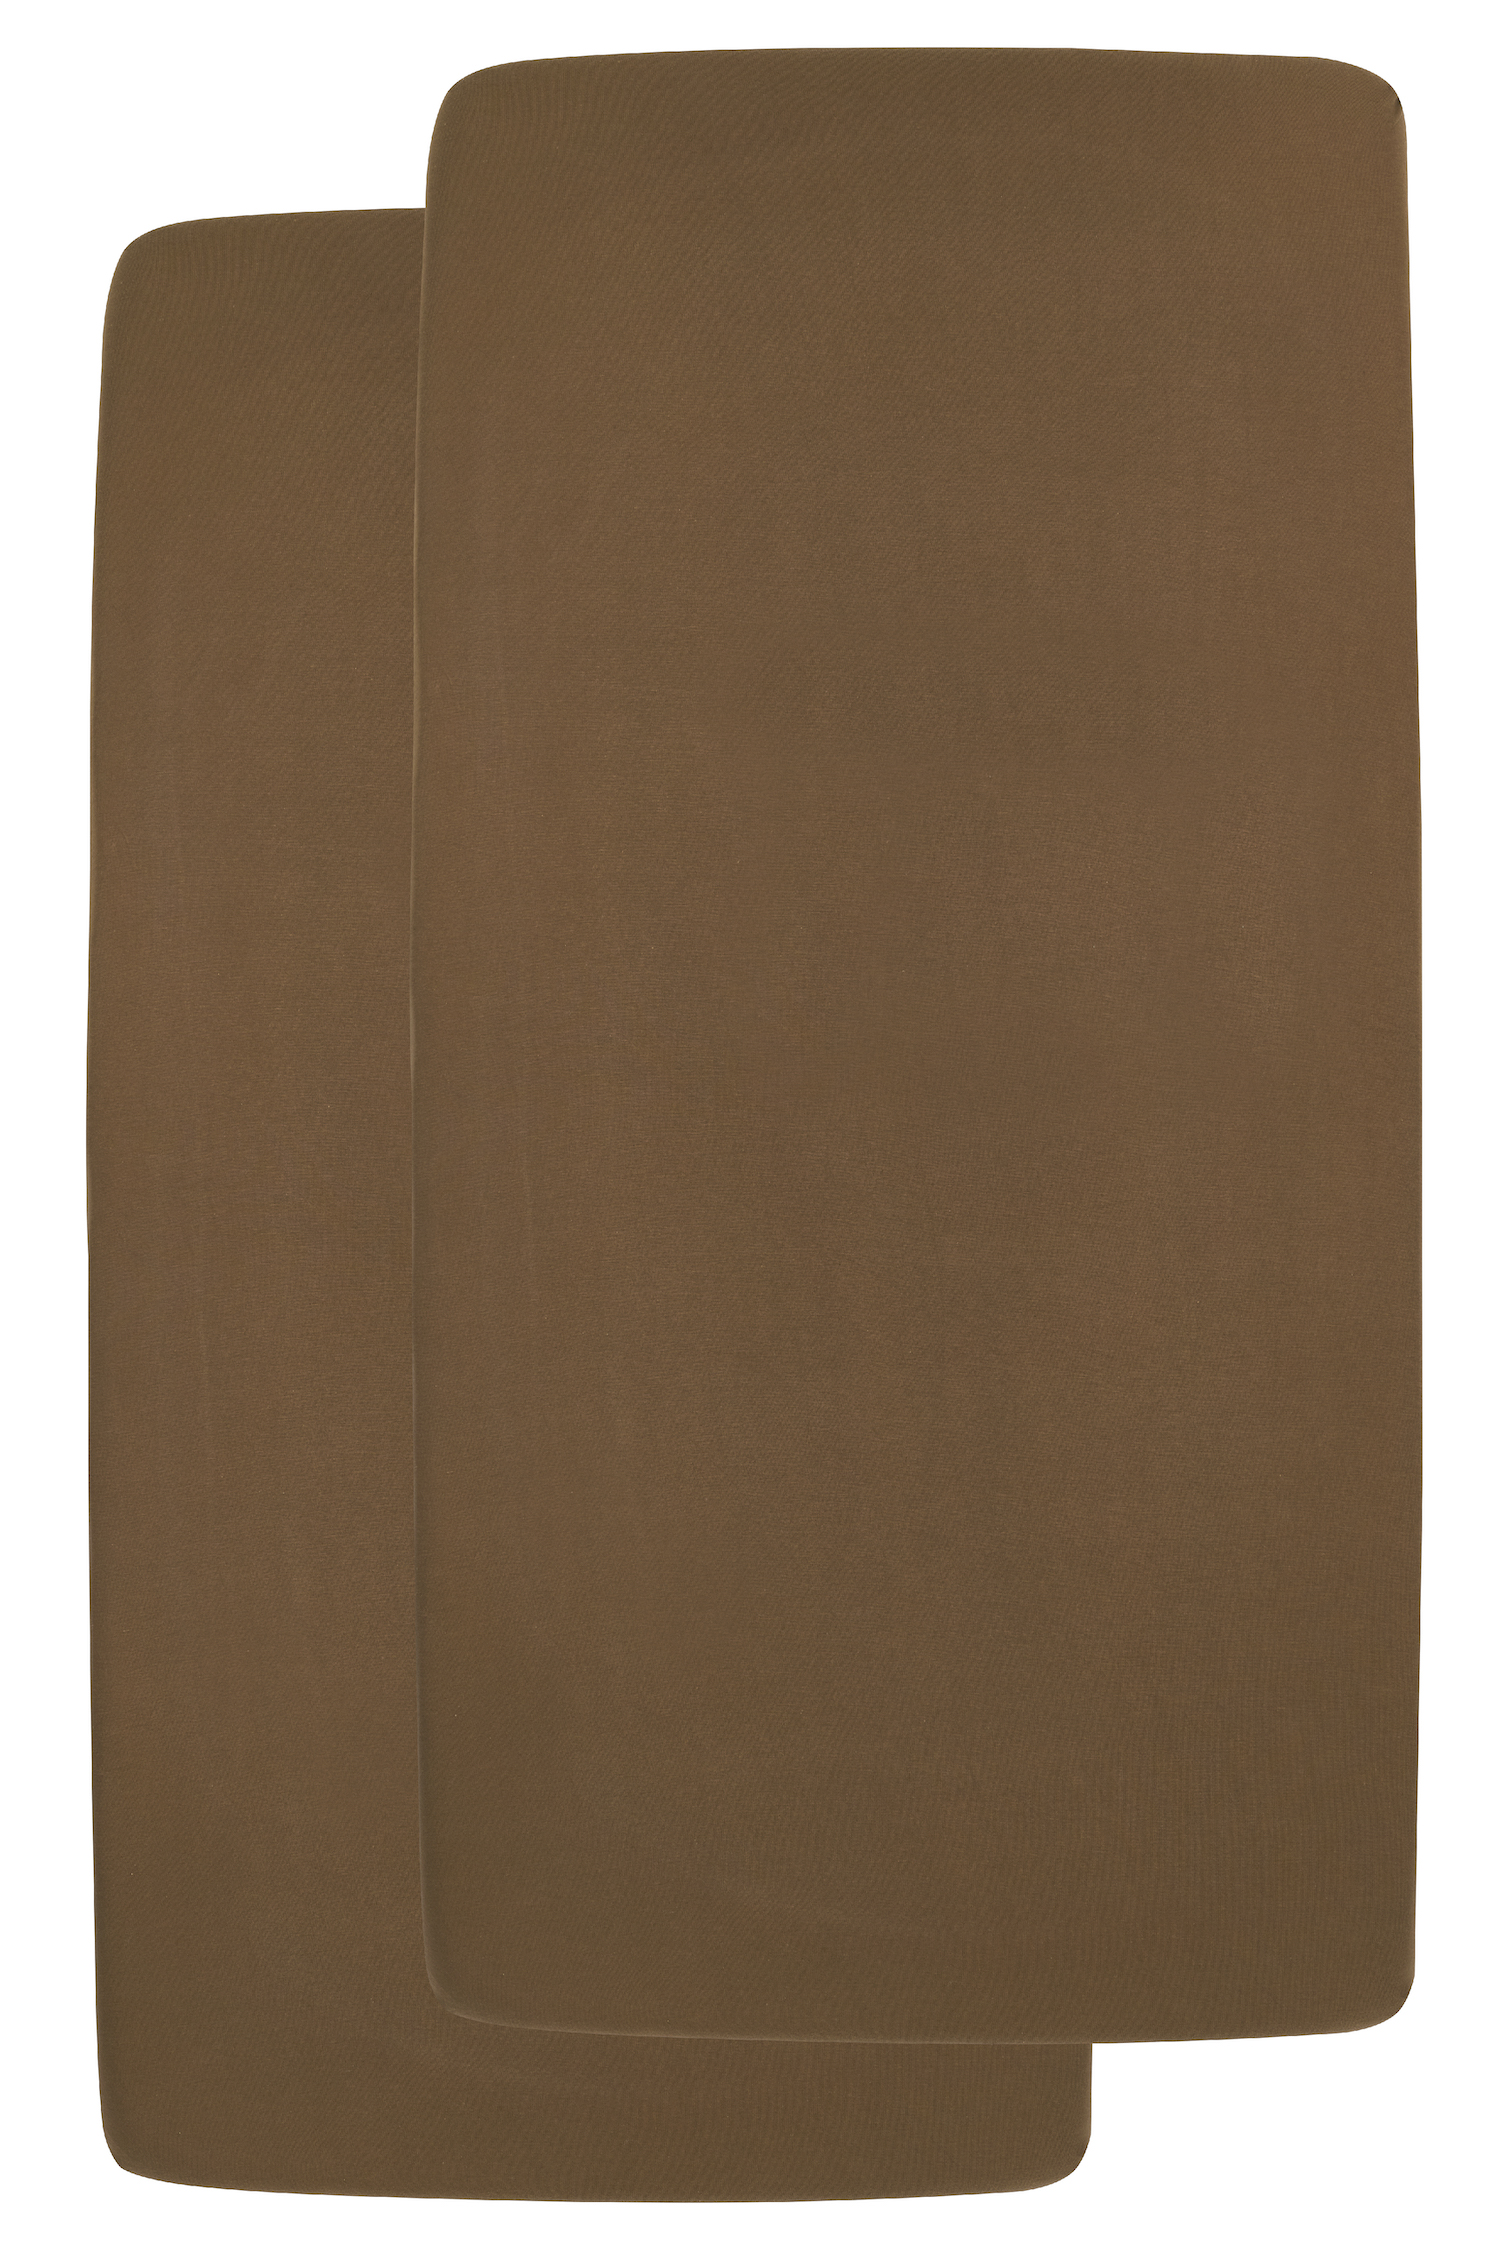 Jersey Fitted Sheet 2-pack - Chocolate - 60x120cm